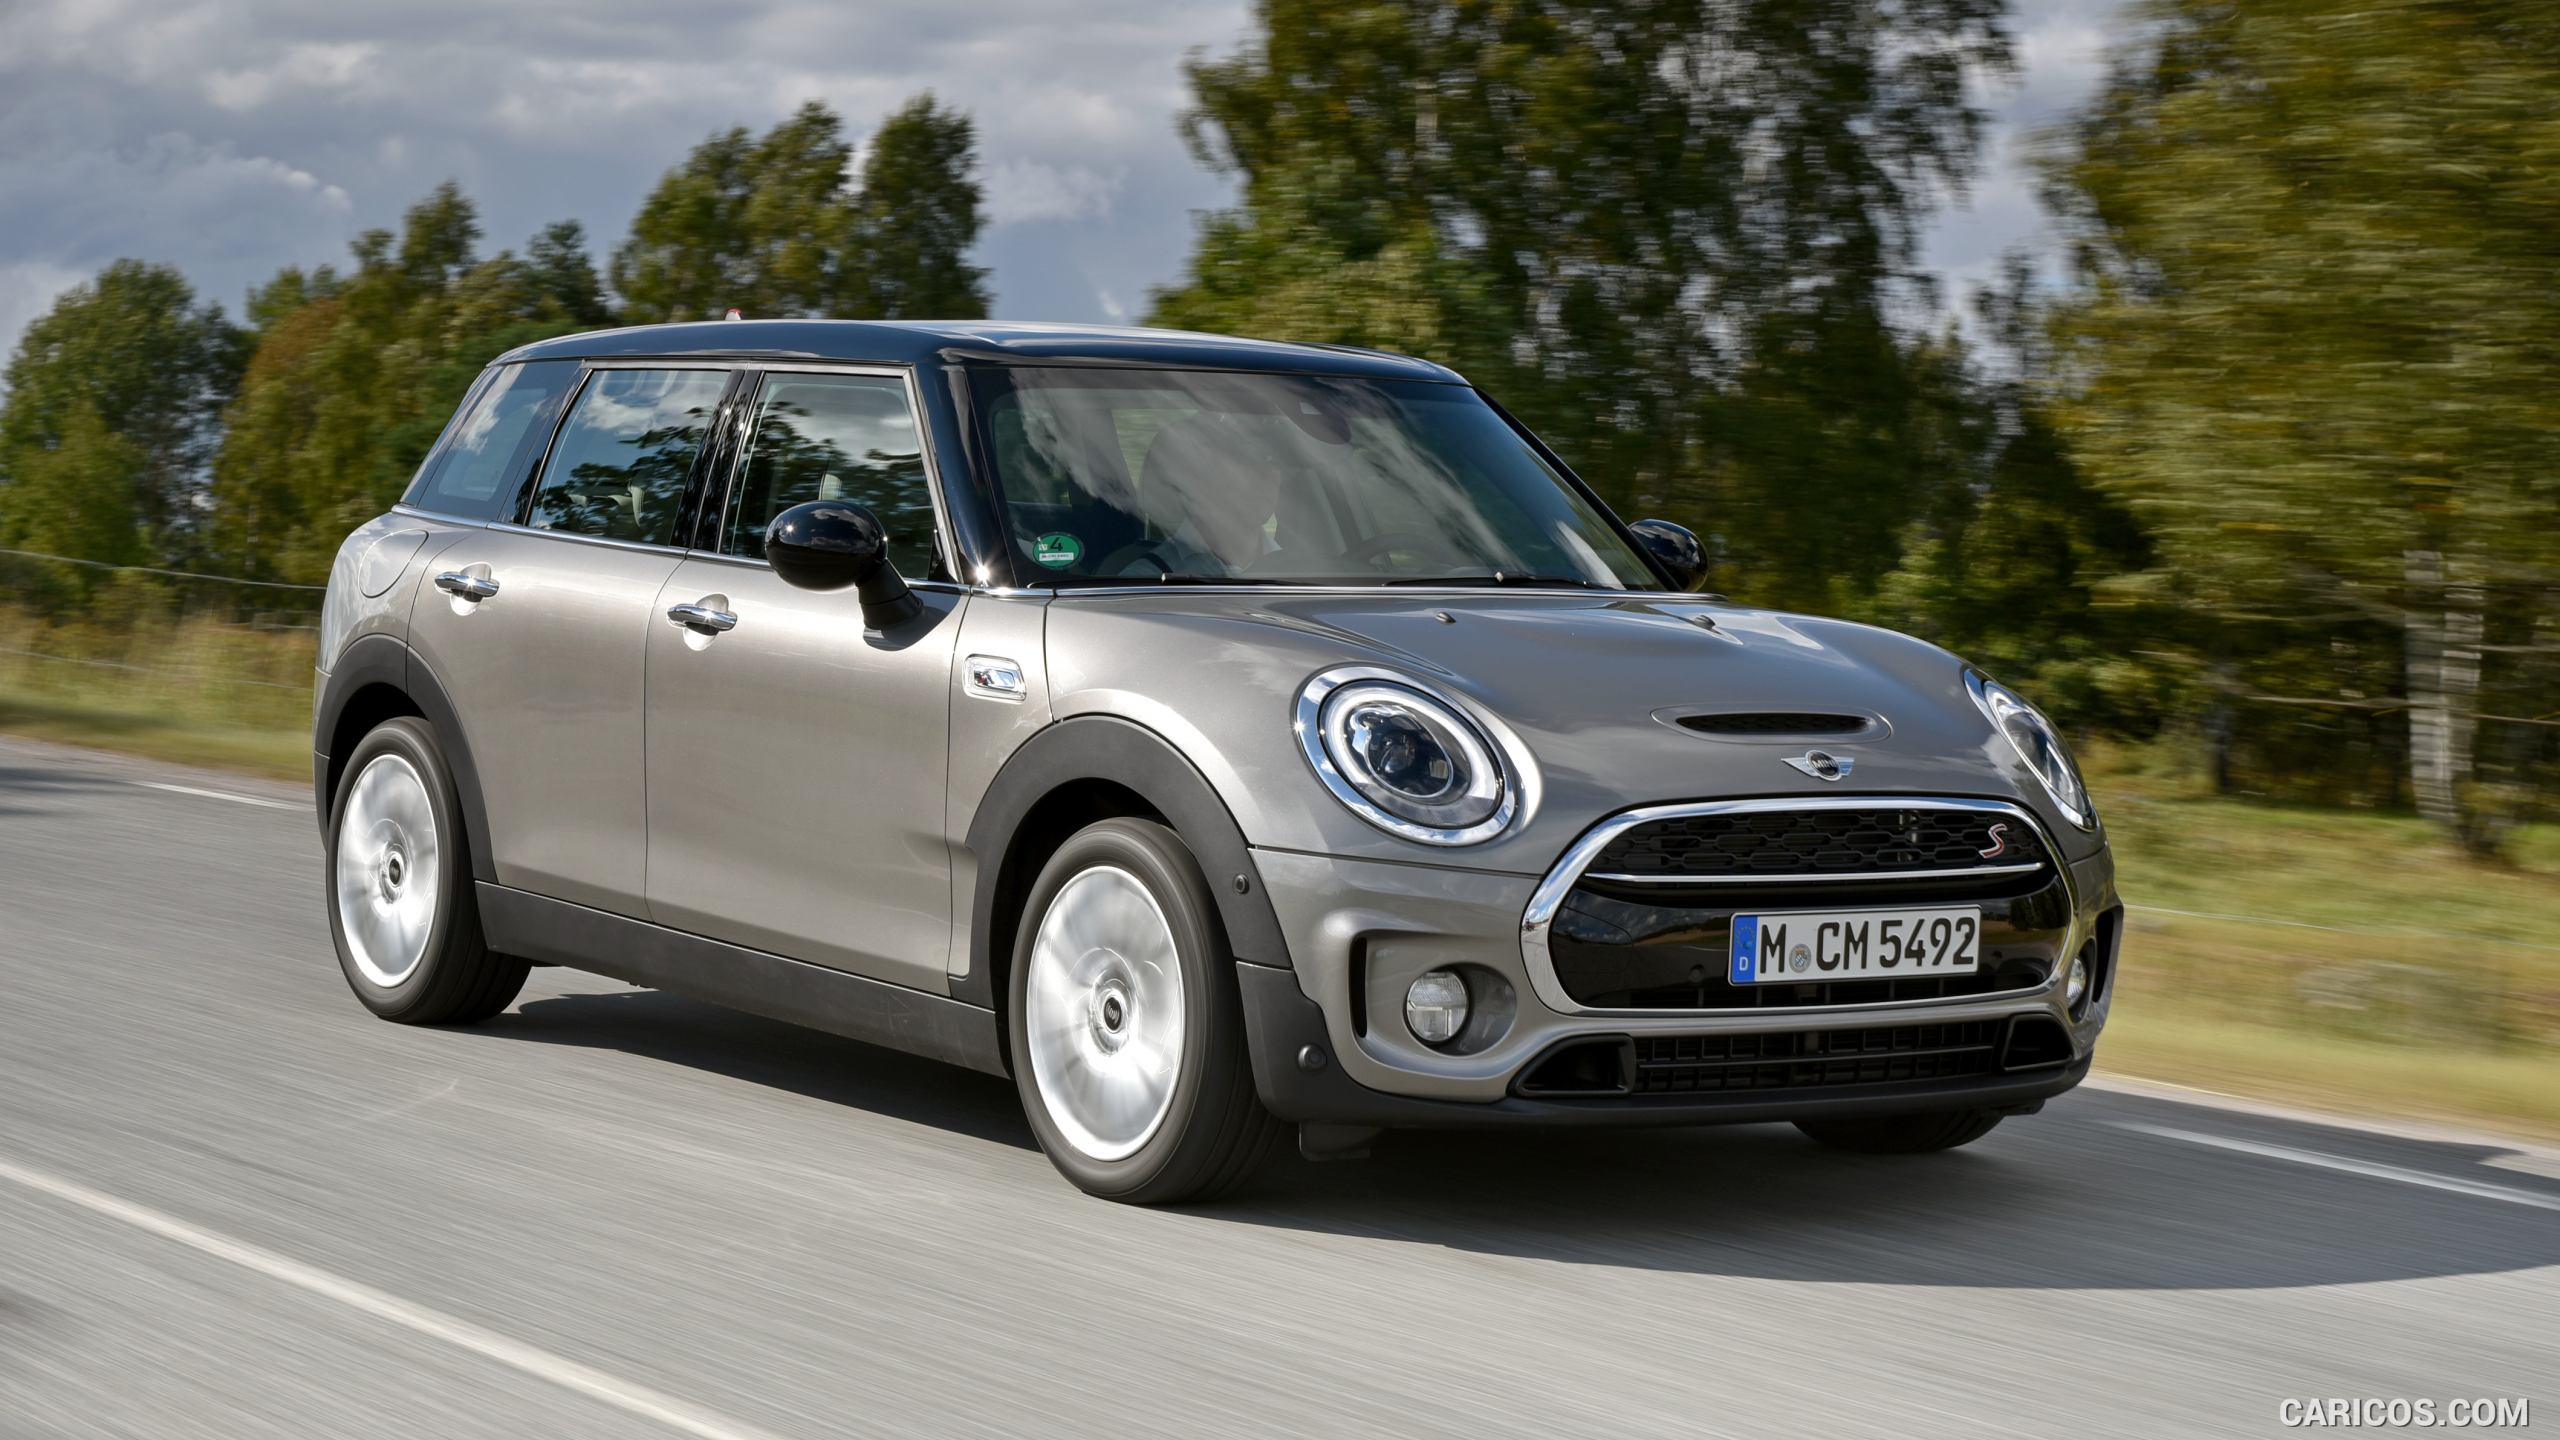 2016 MINI Cooper S Clubman in Metallic Melting Silver - Front, #121 of 380